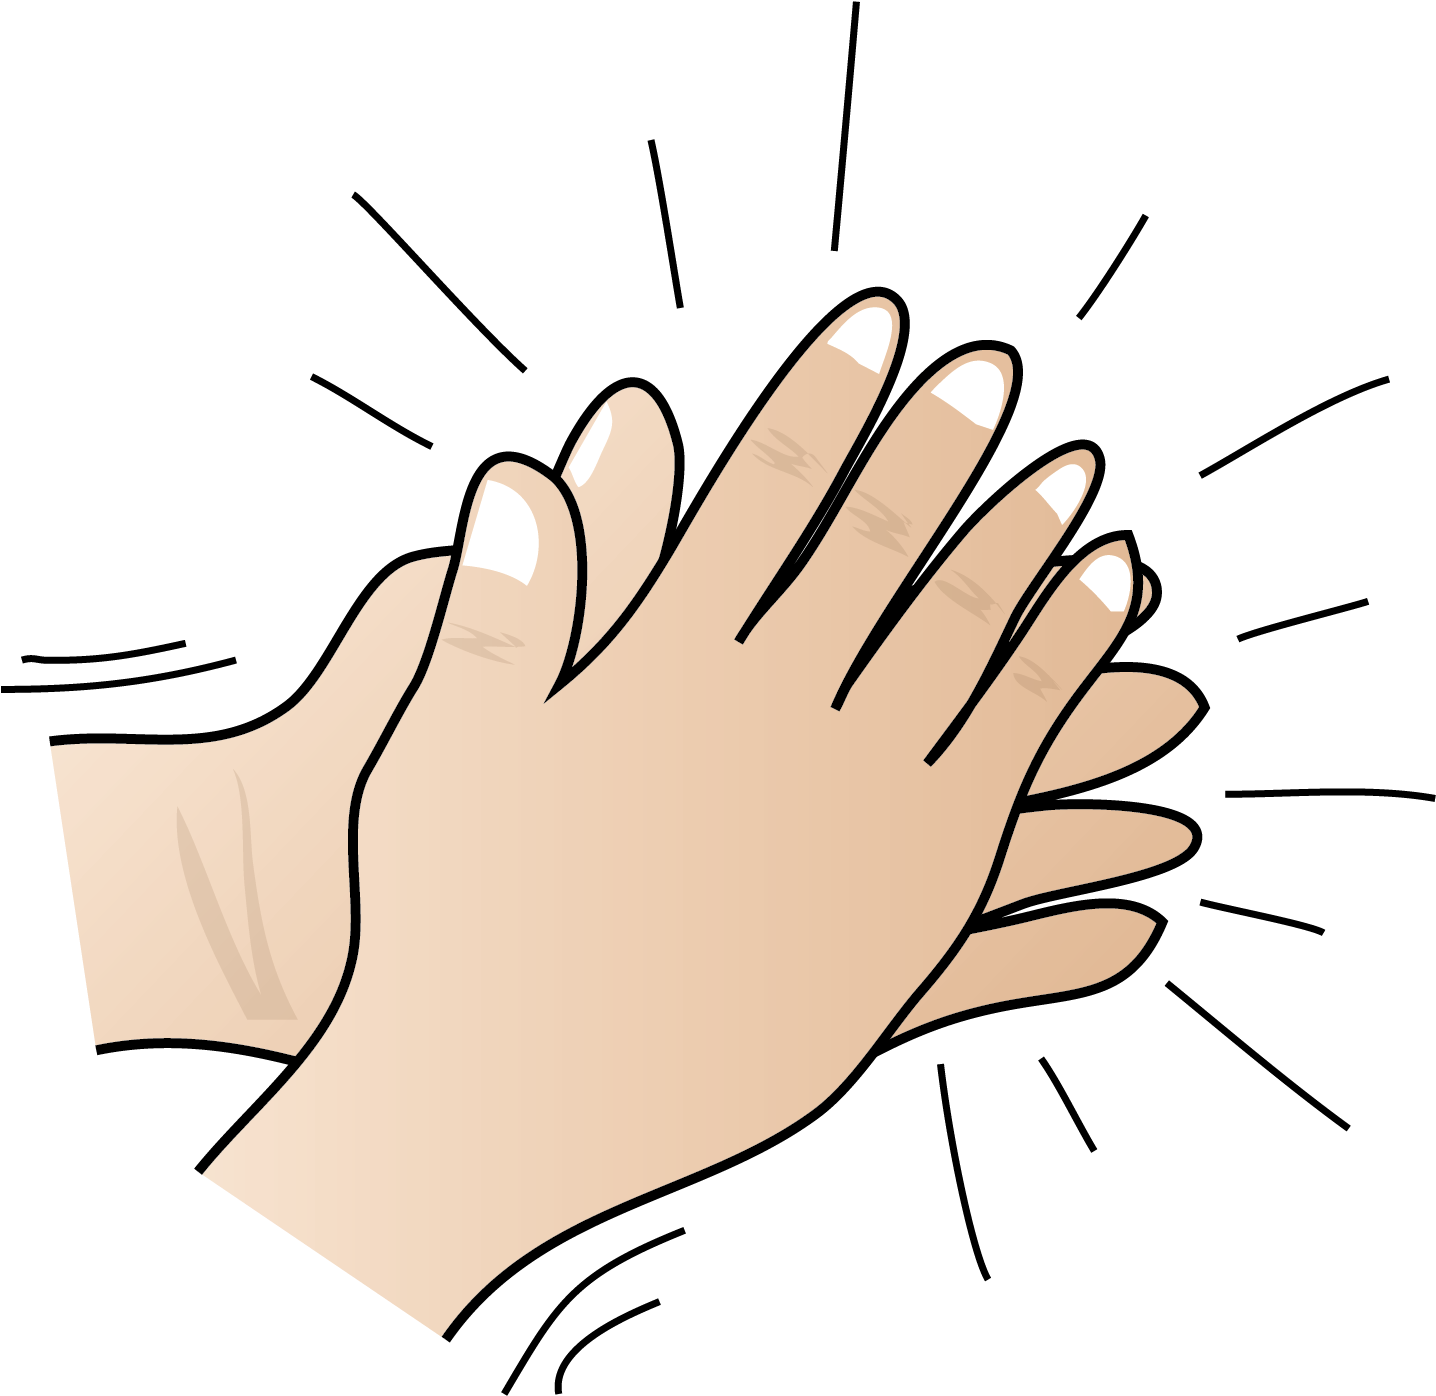 A Pair Of Hands Clapping